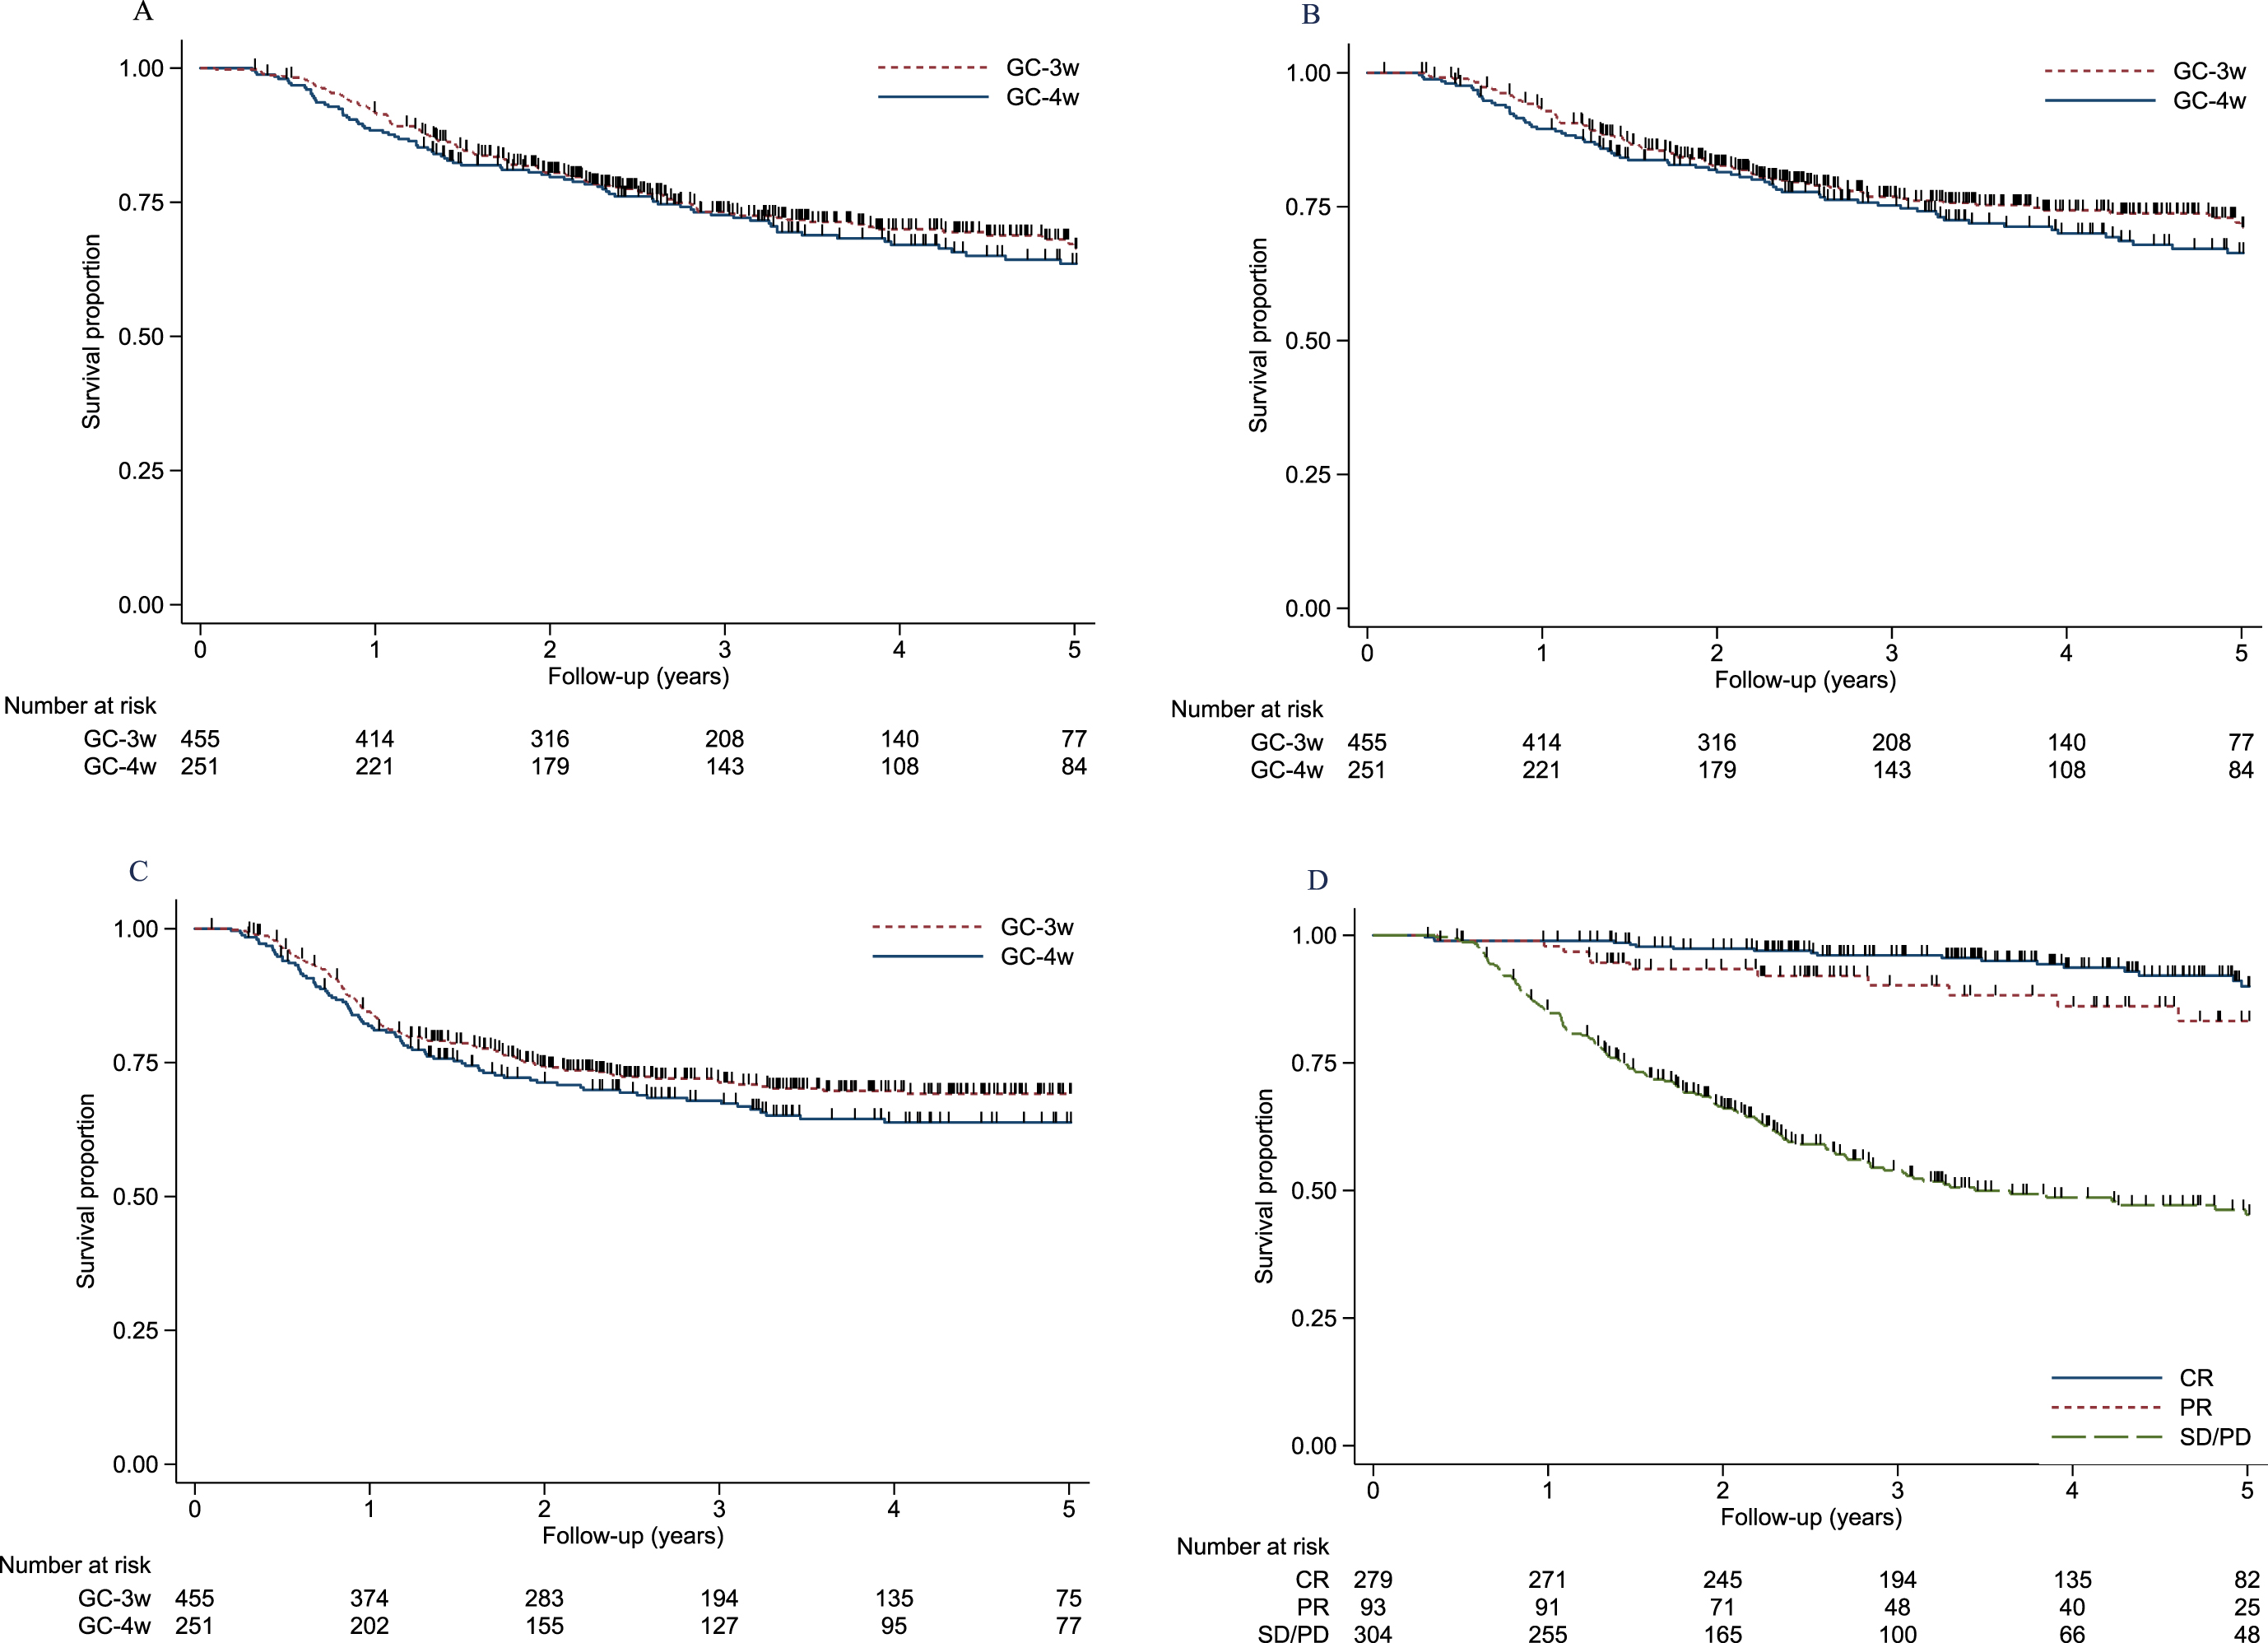 Overall survival (A), bladder-cancer-specific survival (B), and relapse-free survival (C) for GC-4w versus GC-3w. (D) Bladder-cancer-specific survivalby pathological response: CR, complete response (pT0N0); PR, partial response (pT1N0, pTisN0, pTaN0); and SD/PD, stable or progressive disease (≥pT2N0/N+).